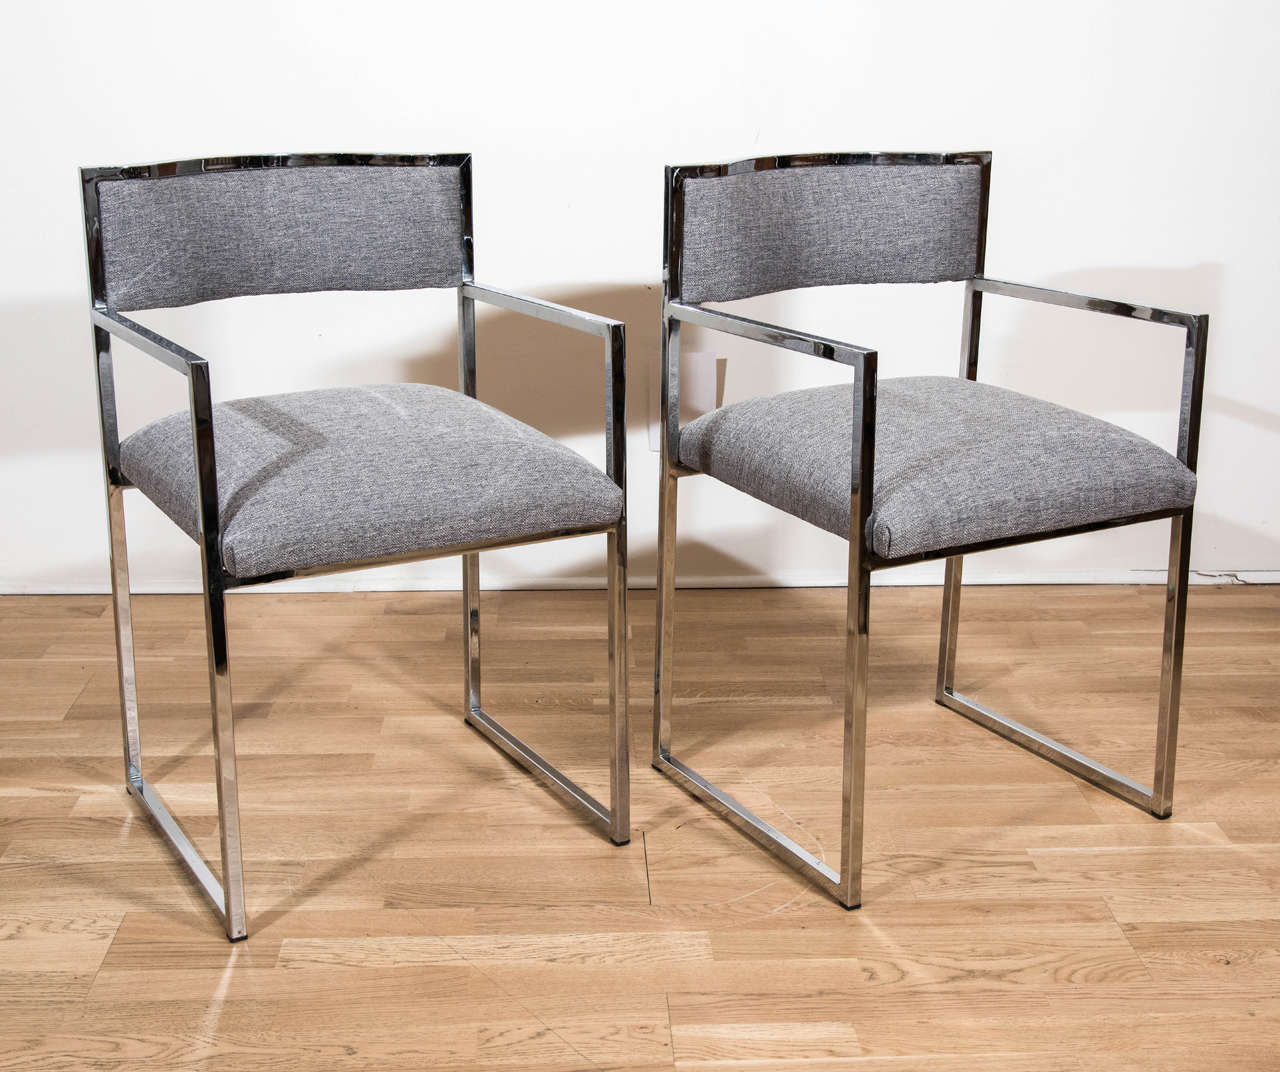 Pair of Chrome Metal Arm Chairs by Willy Rizzo 1